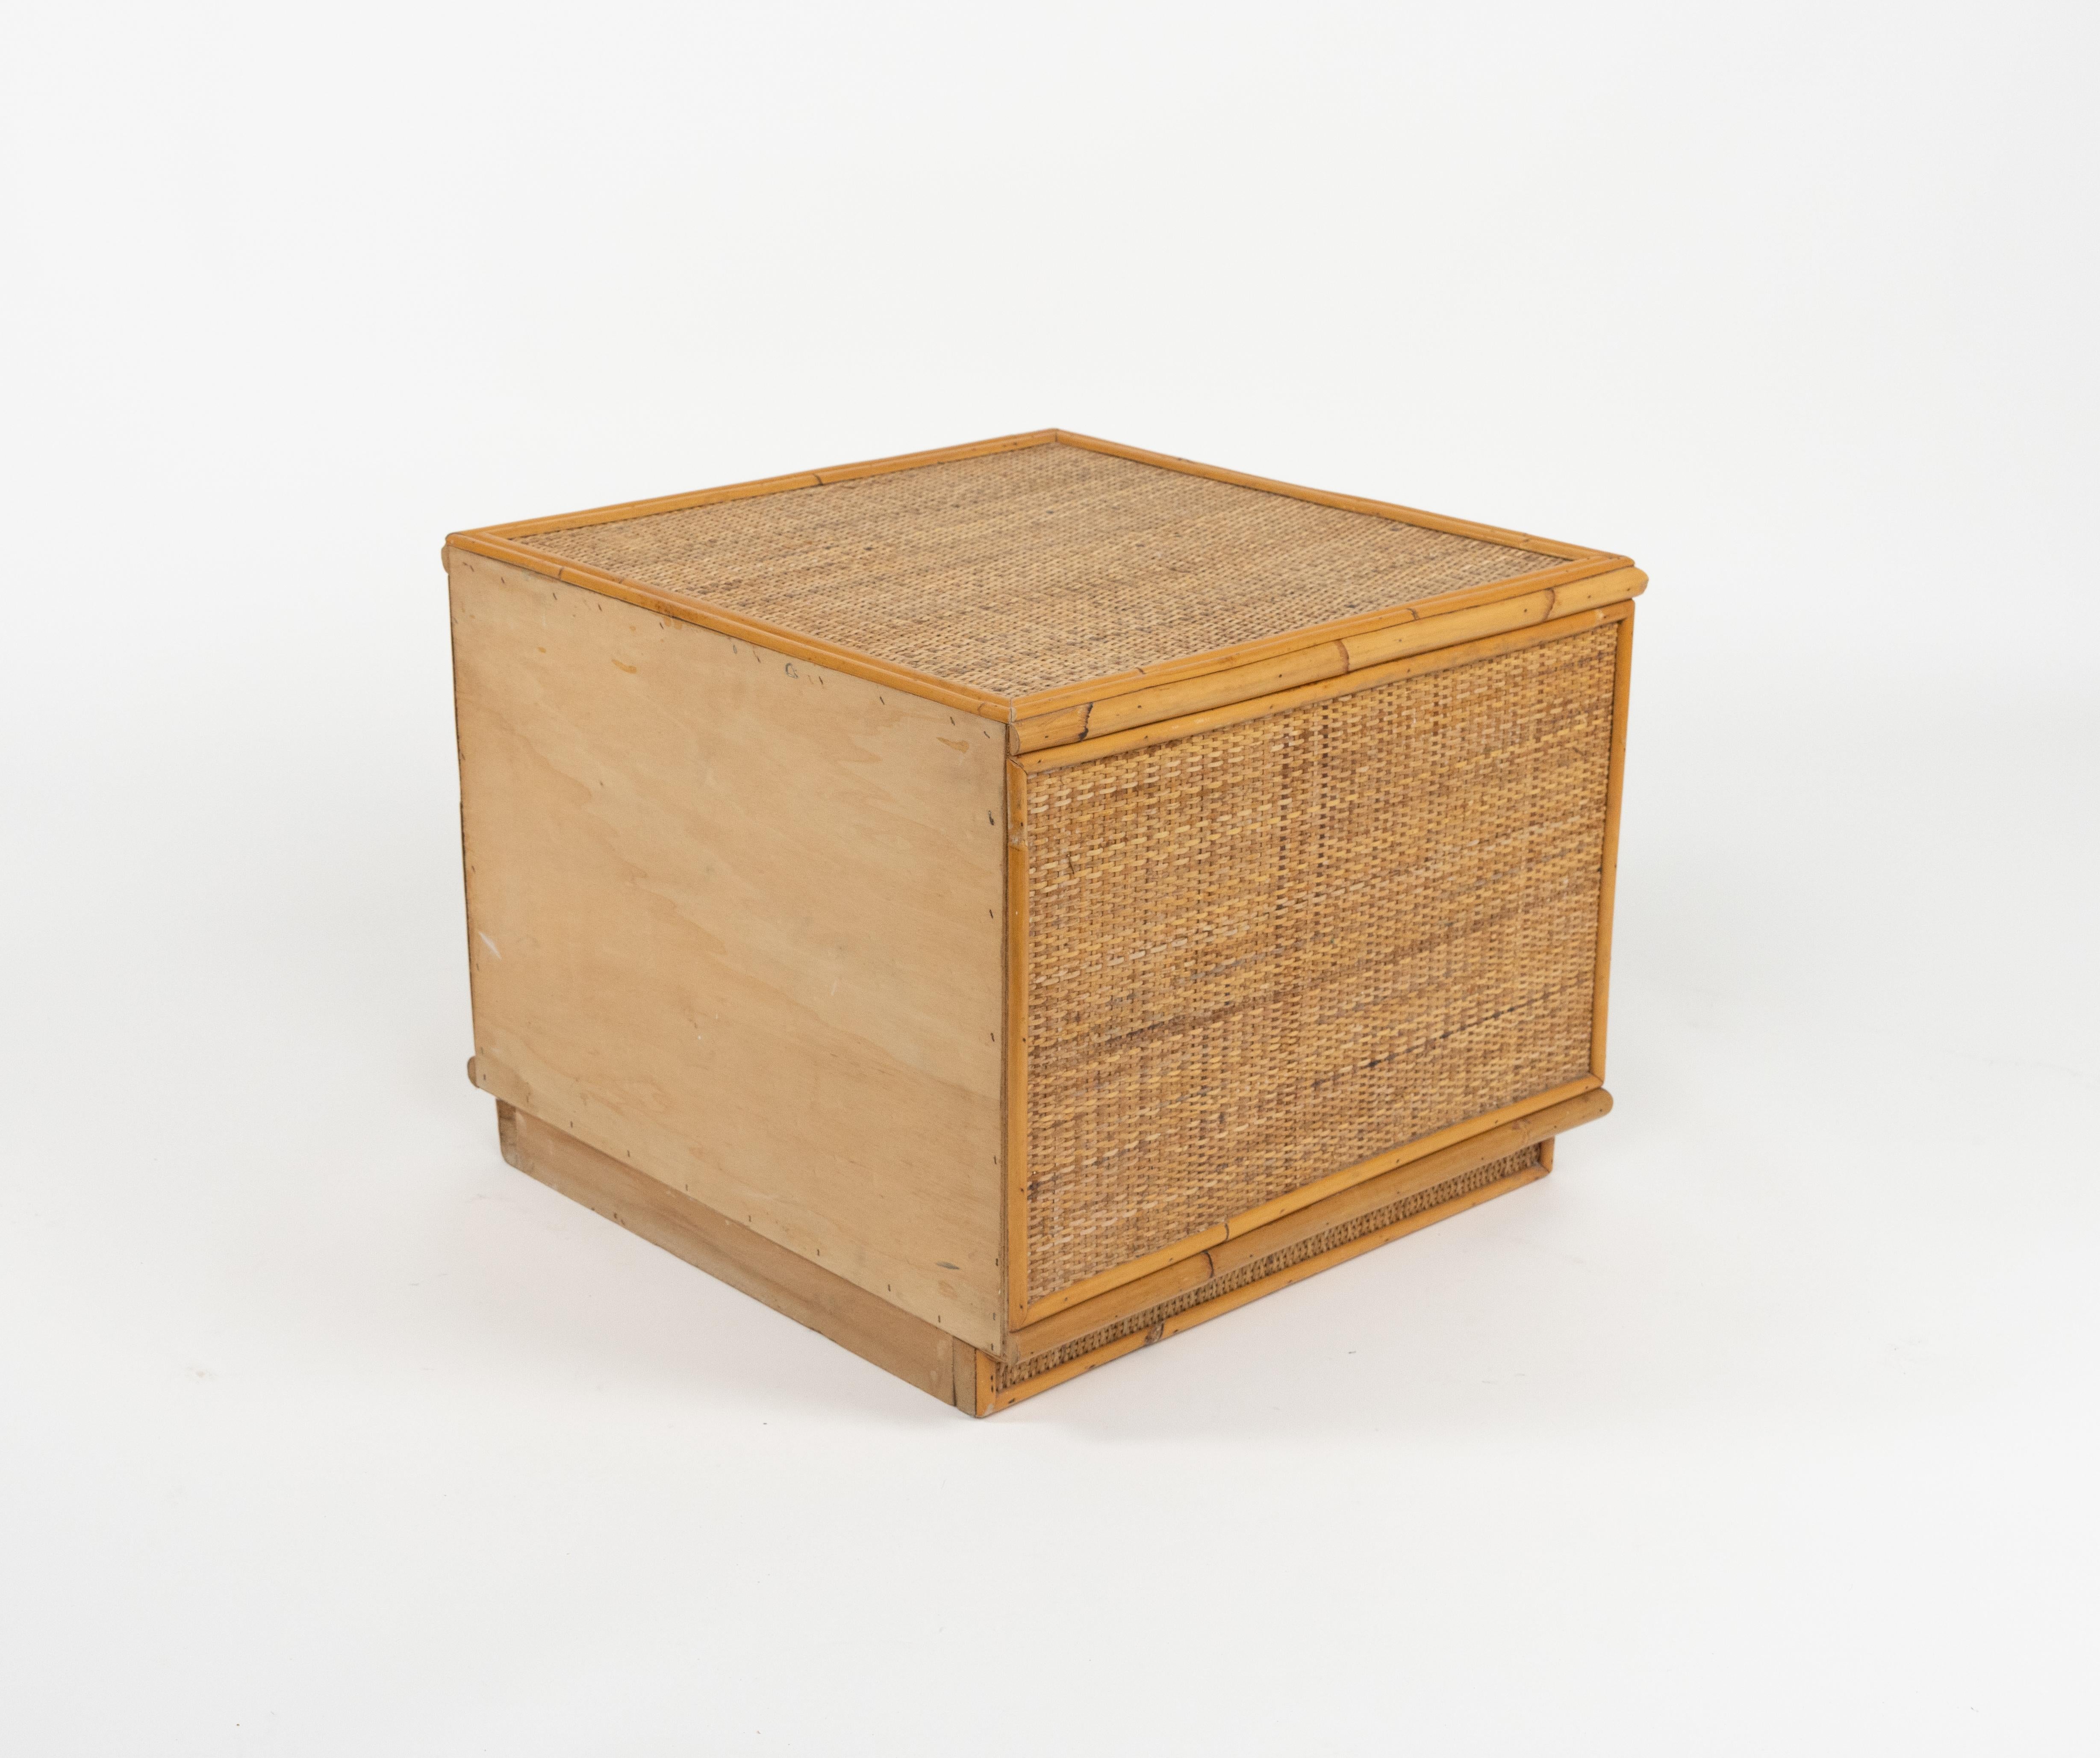 Bamboo and Rattan Pair of Bedside Tables Nightstands Dal Vera Style, Italy 1970s For Sale 13